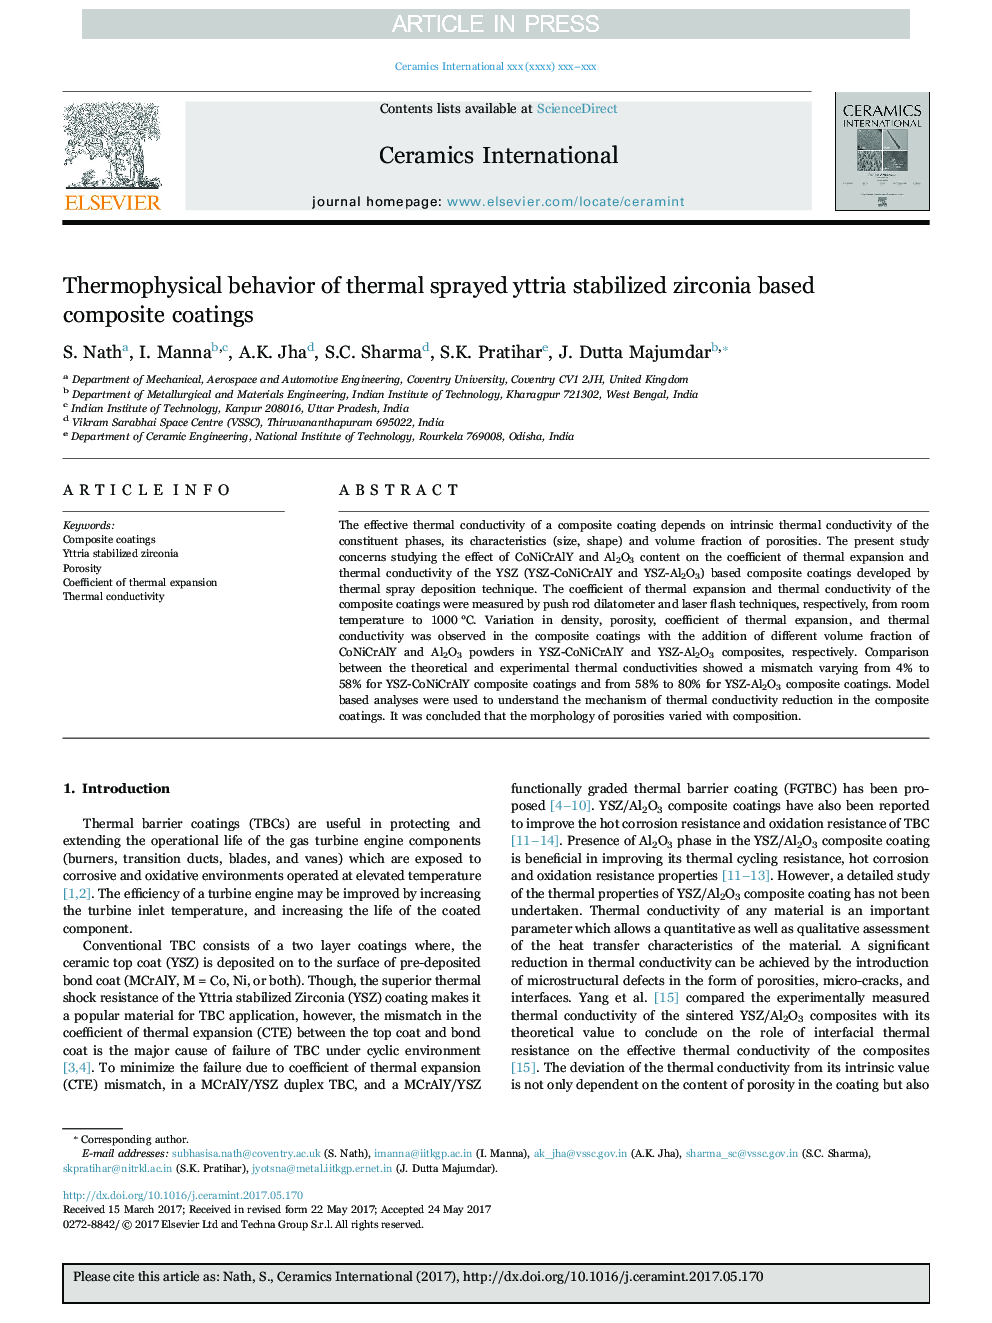 Thermophysical behavior of thermal sprayed yttria stabilized zirconia based composite coatings